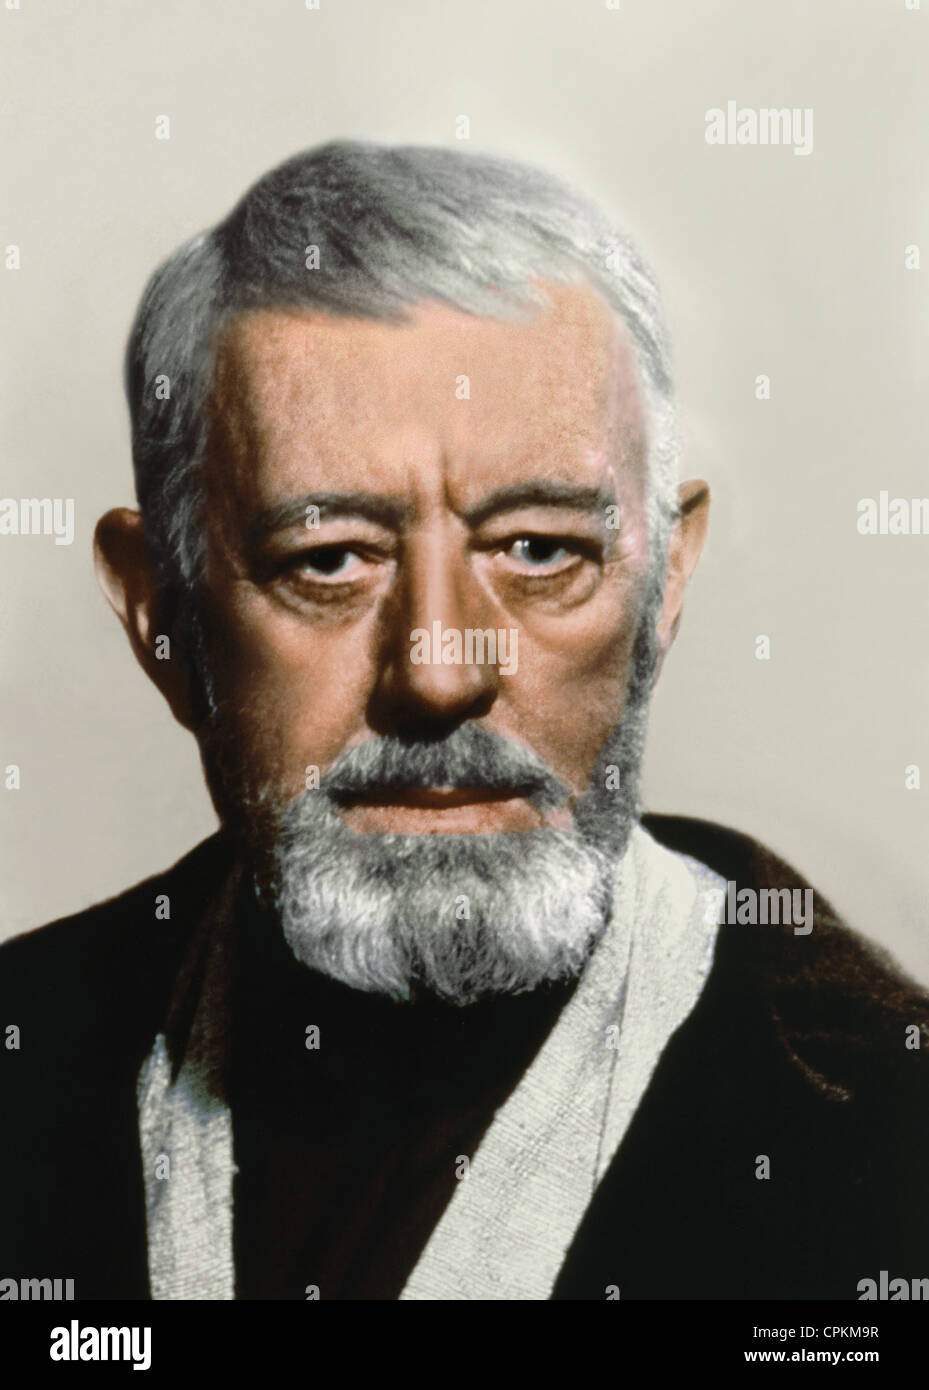 A portrait of Sir Alec Guinness in the 1977 film Star Wars. He is playing the role of the Jedi Knight, Ben Obi-Wan Kenobi. Stock Photo